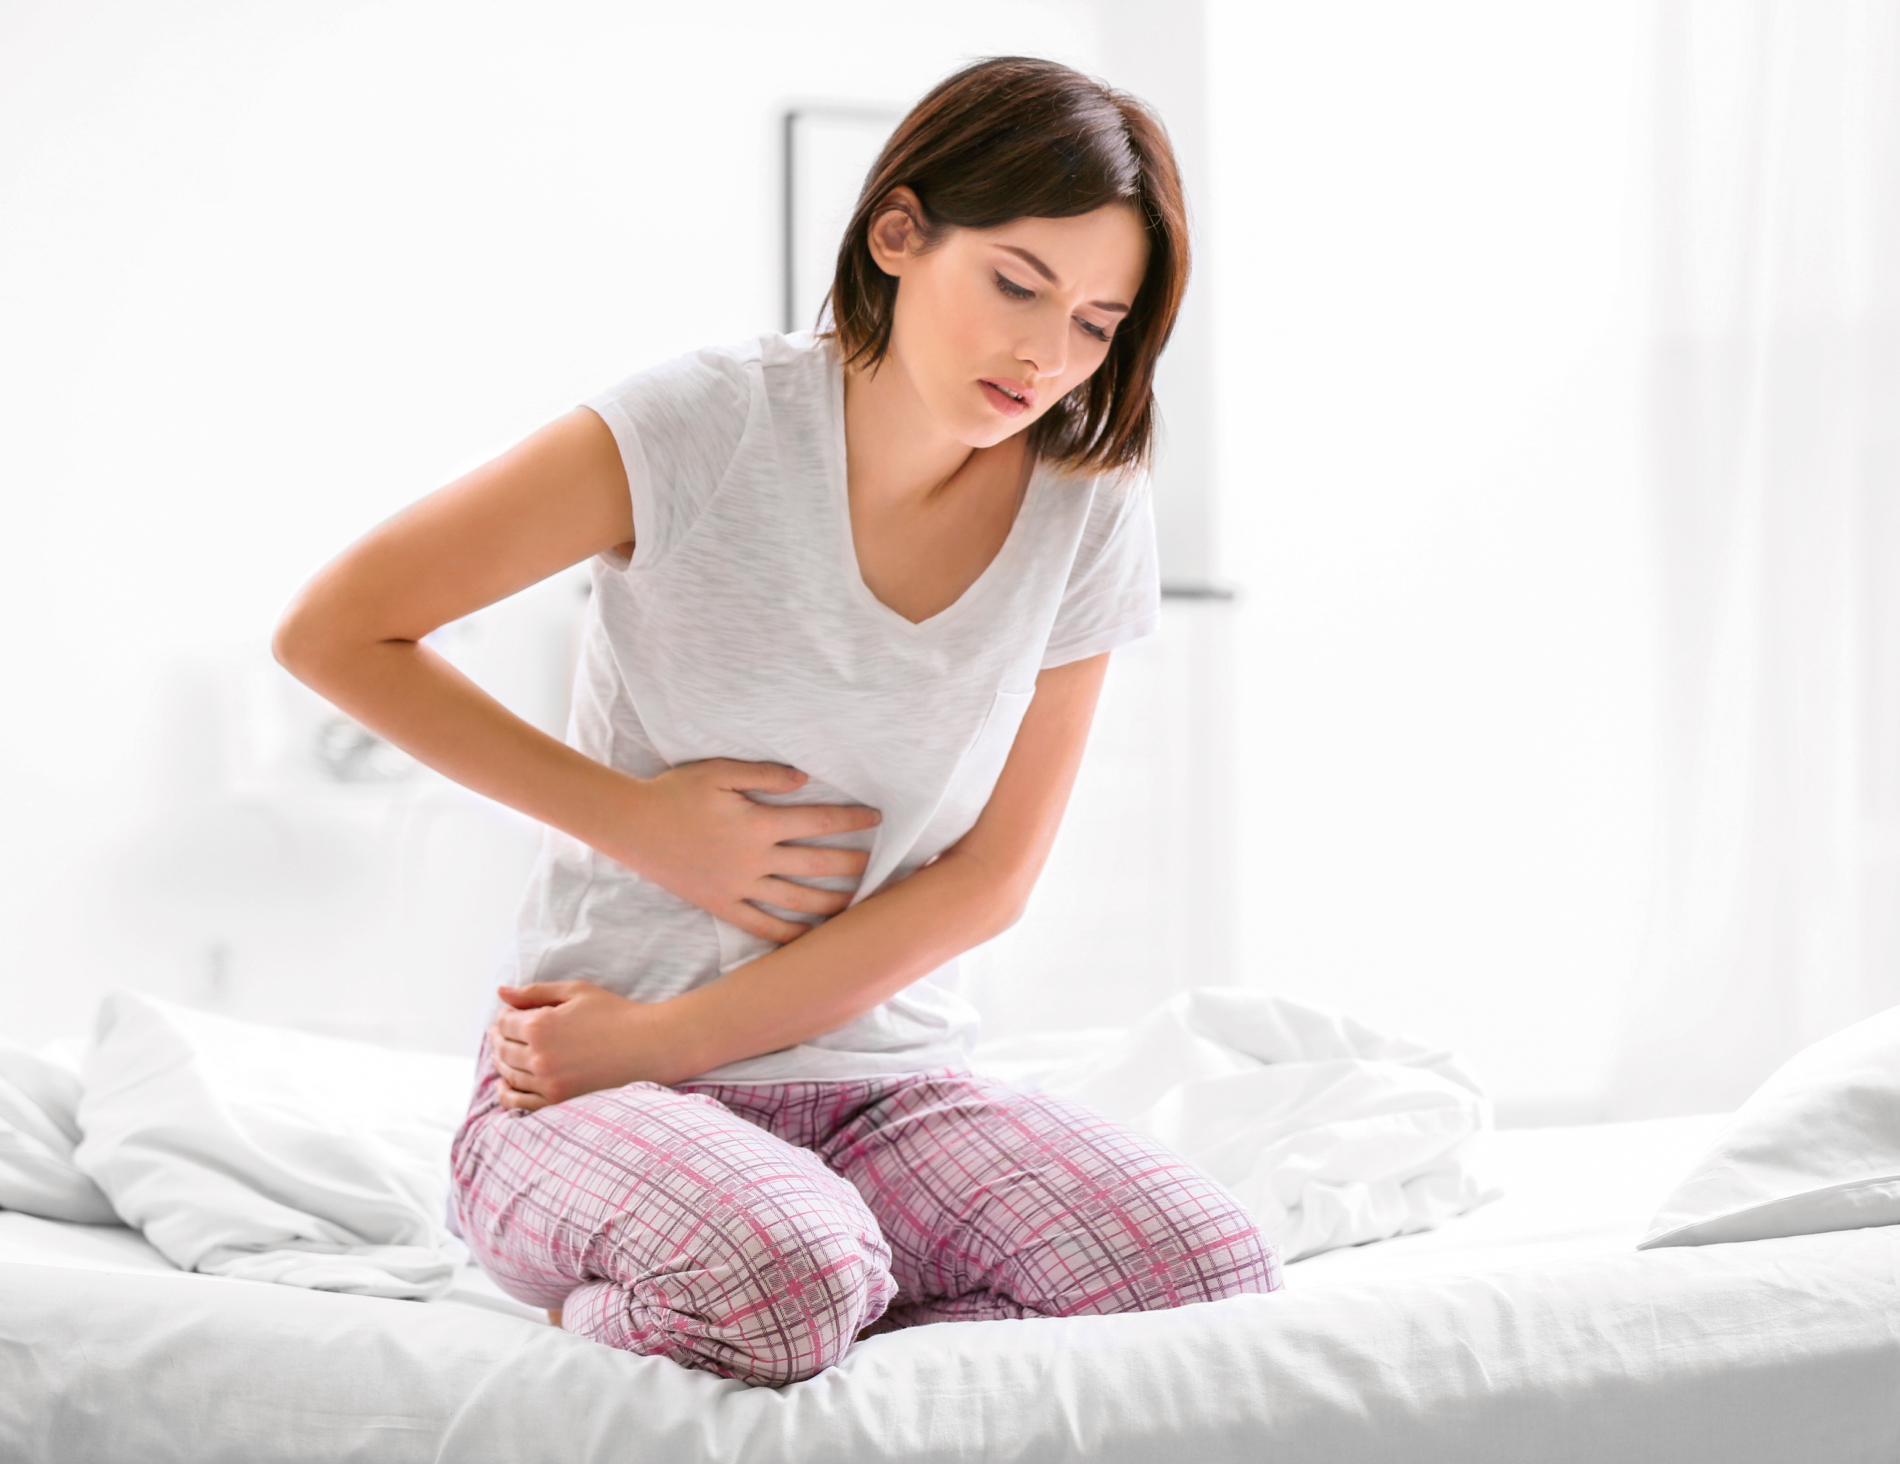 Abdominal distension or what is known as 'irritable bowel' is one of the most common symptoms of DAO deficiency.